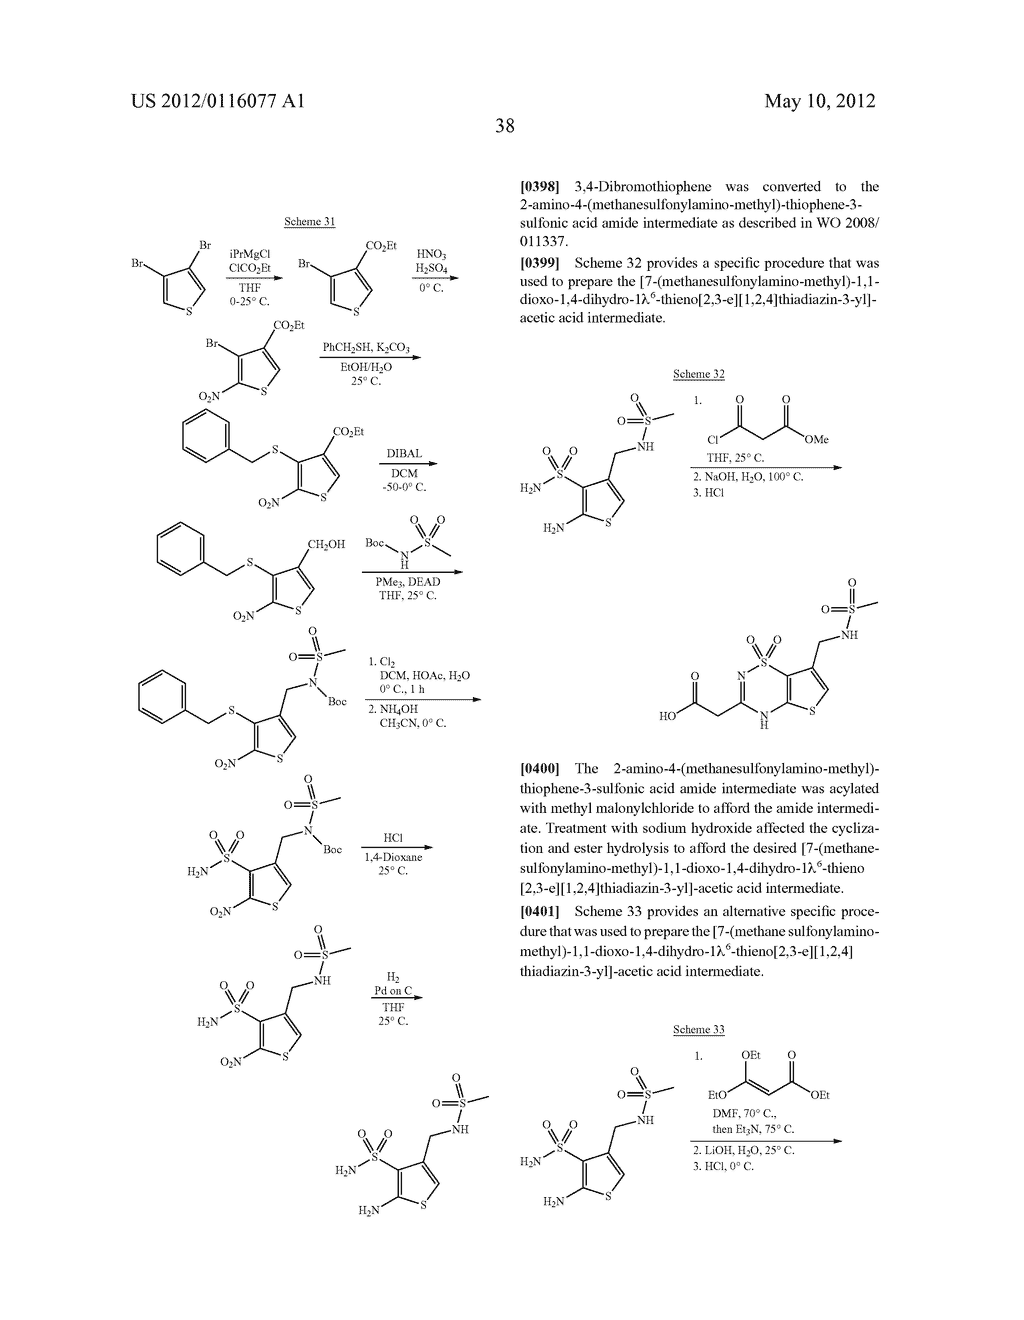 [1,2,4]THIADIAZIN-3-YL ACETIC ACID COMPOUND[[S]] AND METHODS OF MAKING THE     ACETIC ACID COMPOUND - diagram, schematic, and image 39